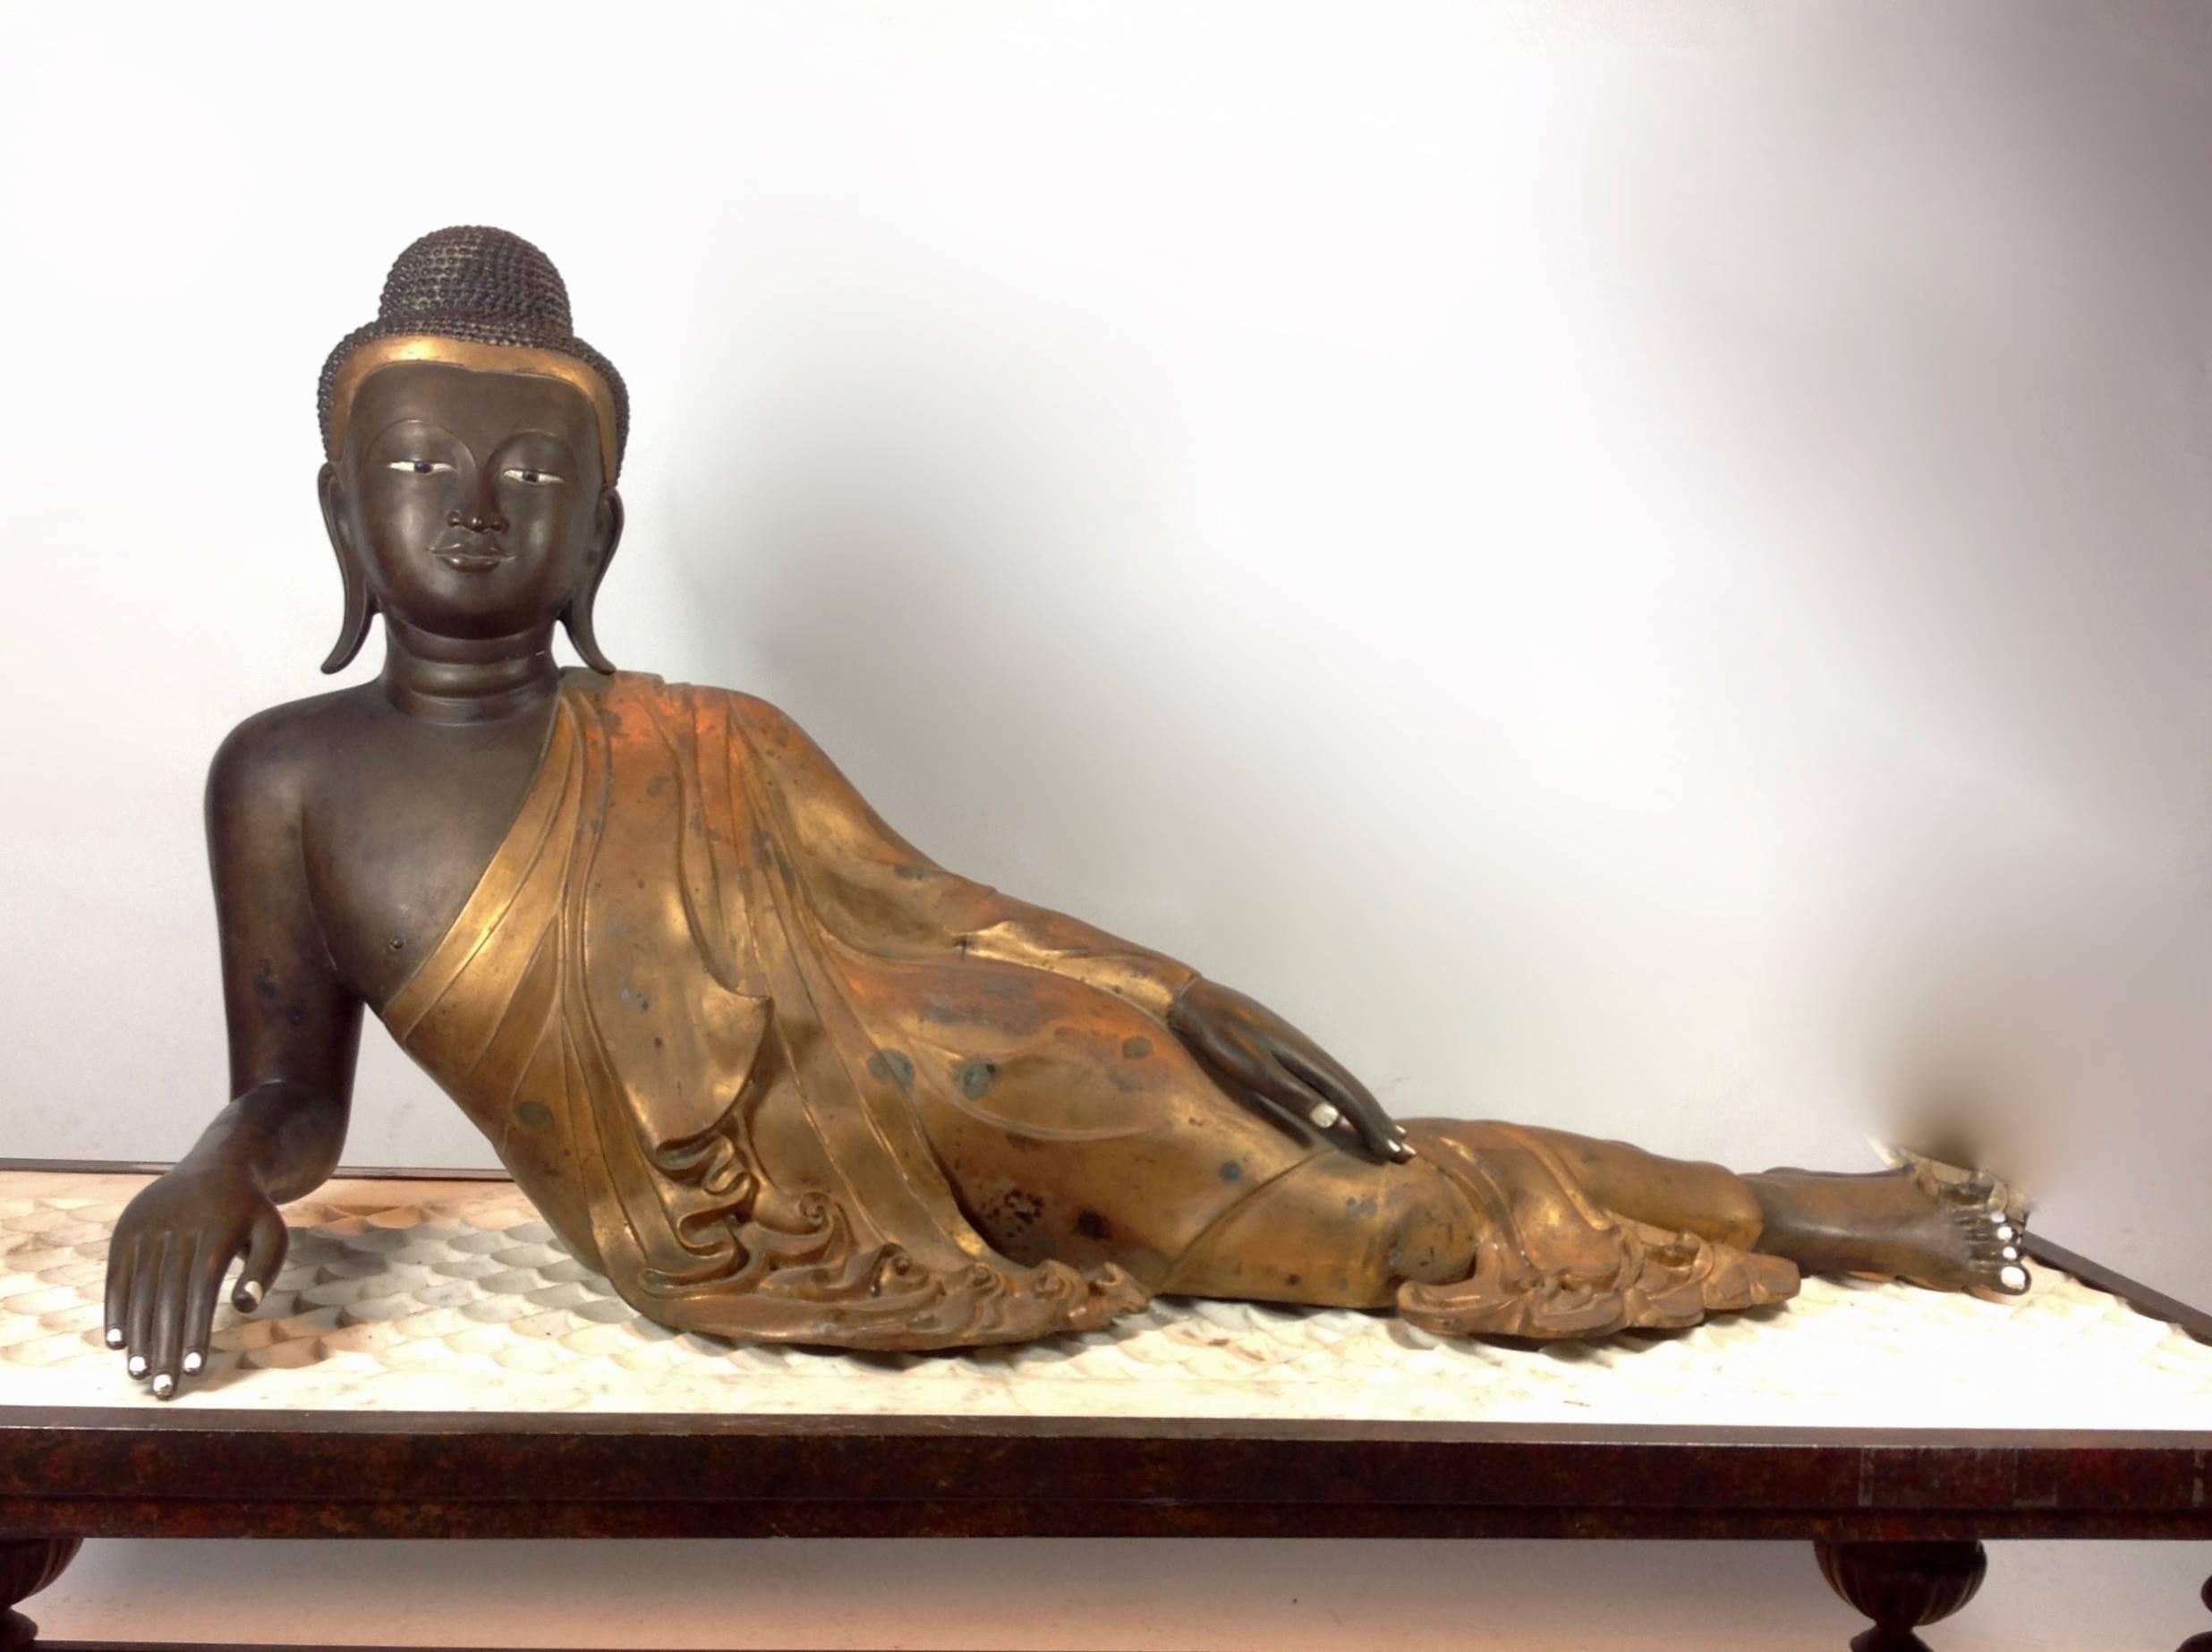 A gorgeous lifesize reclining Buddha; Burmese; circa 1800s. Exquisite countenance and robe detailing in cast bronze.